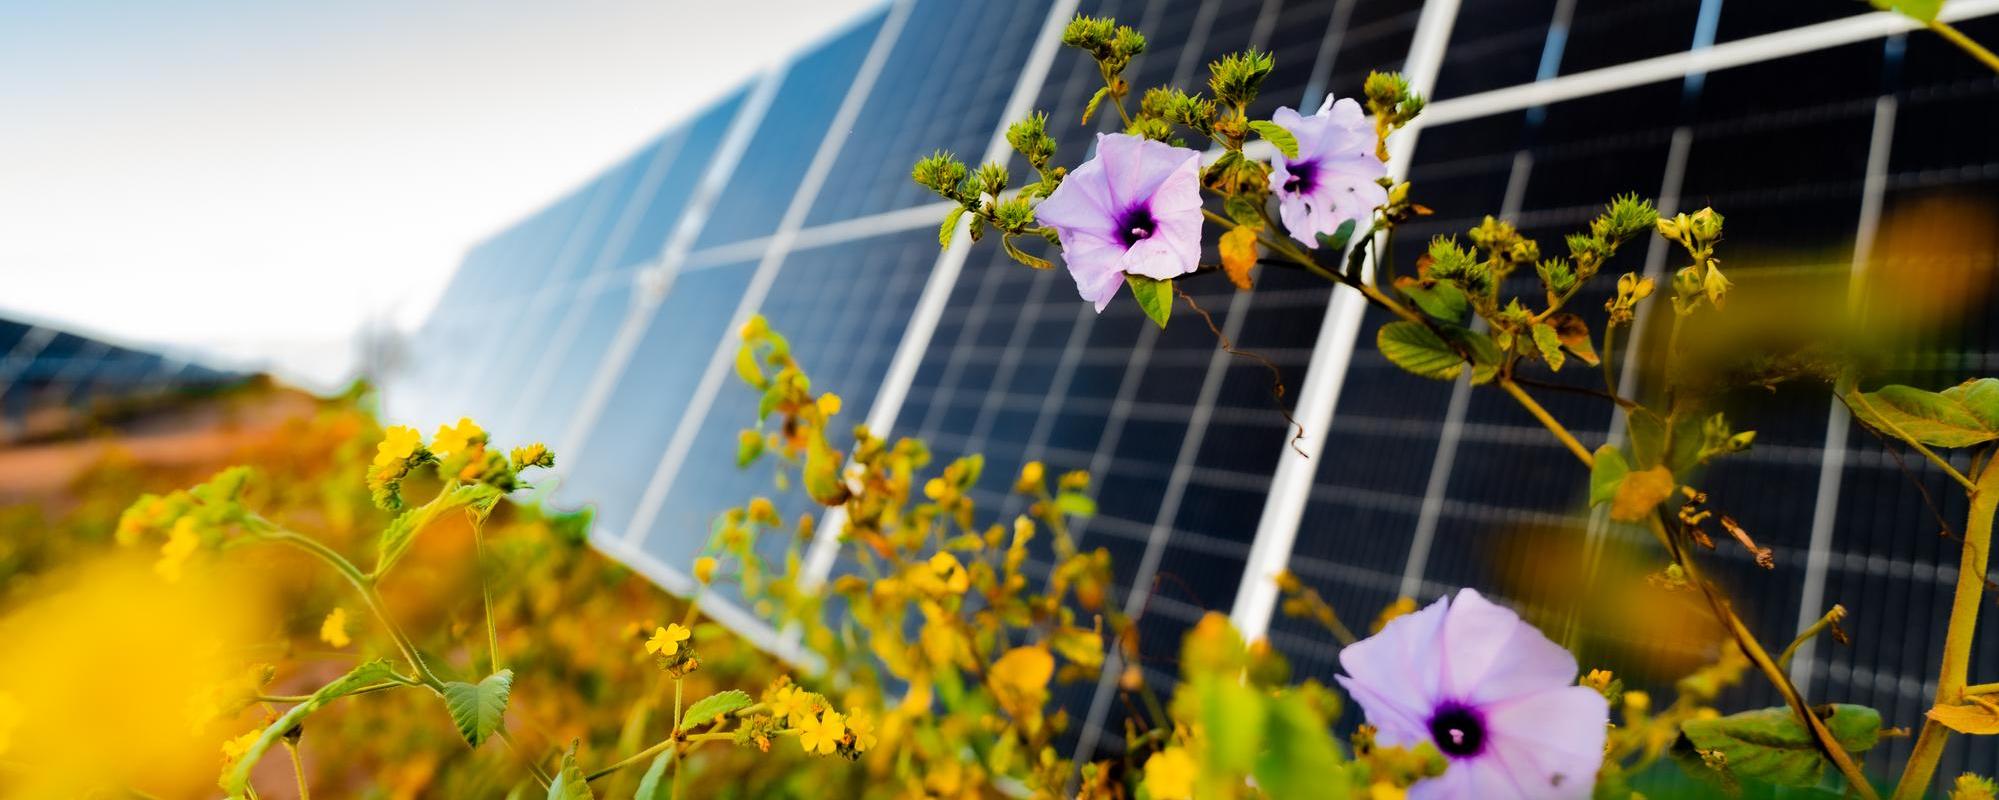 Flowers in front of solar panels at Milagres